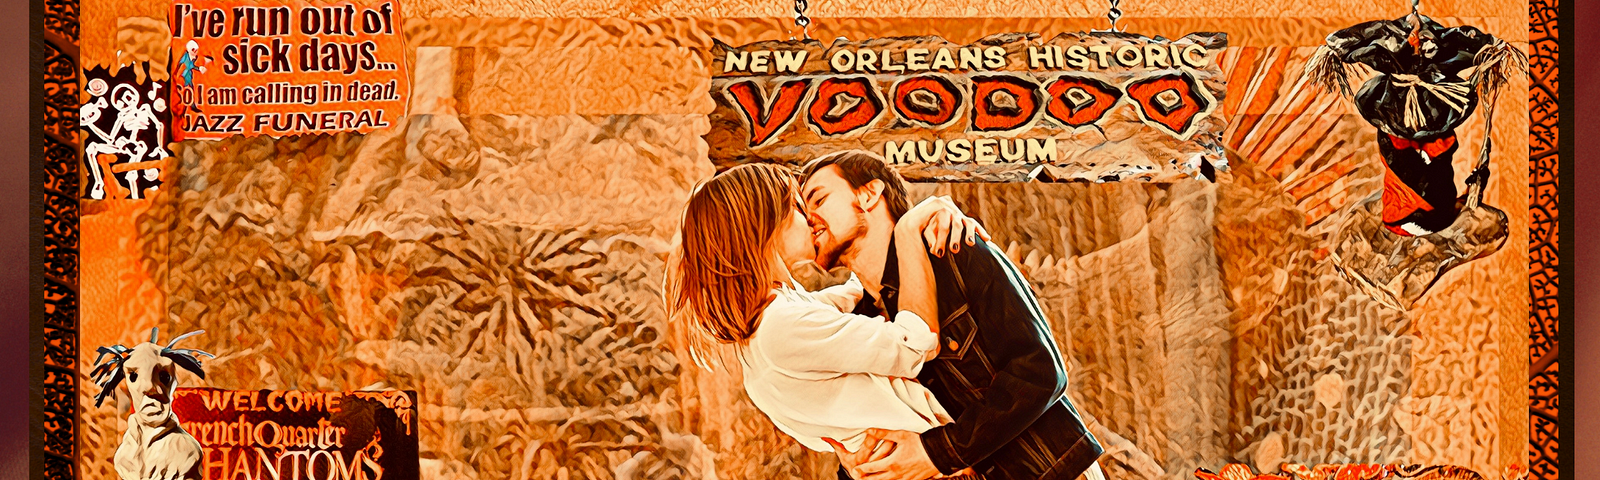 A young couple embracing in front of a sign for the New Orleans Voodo Museum